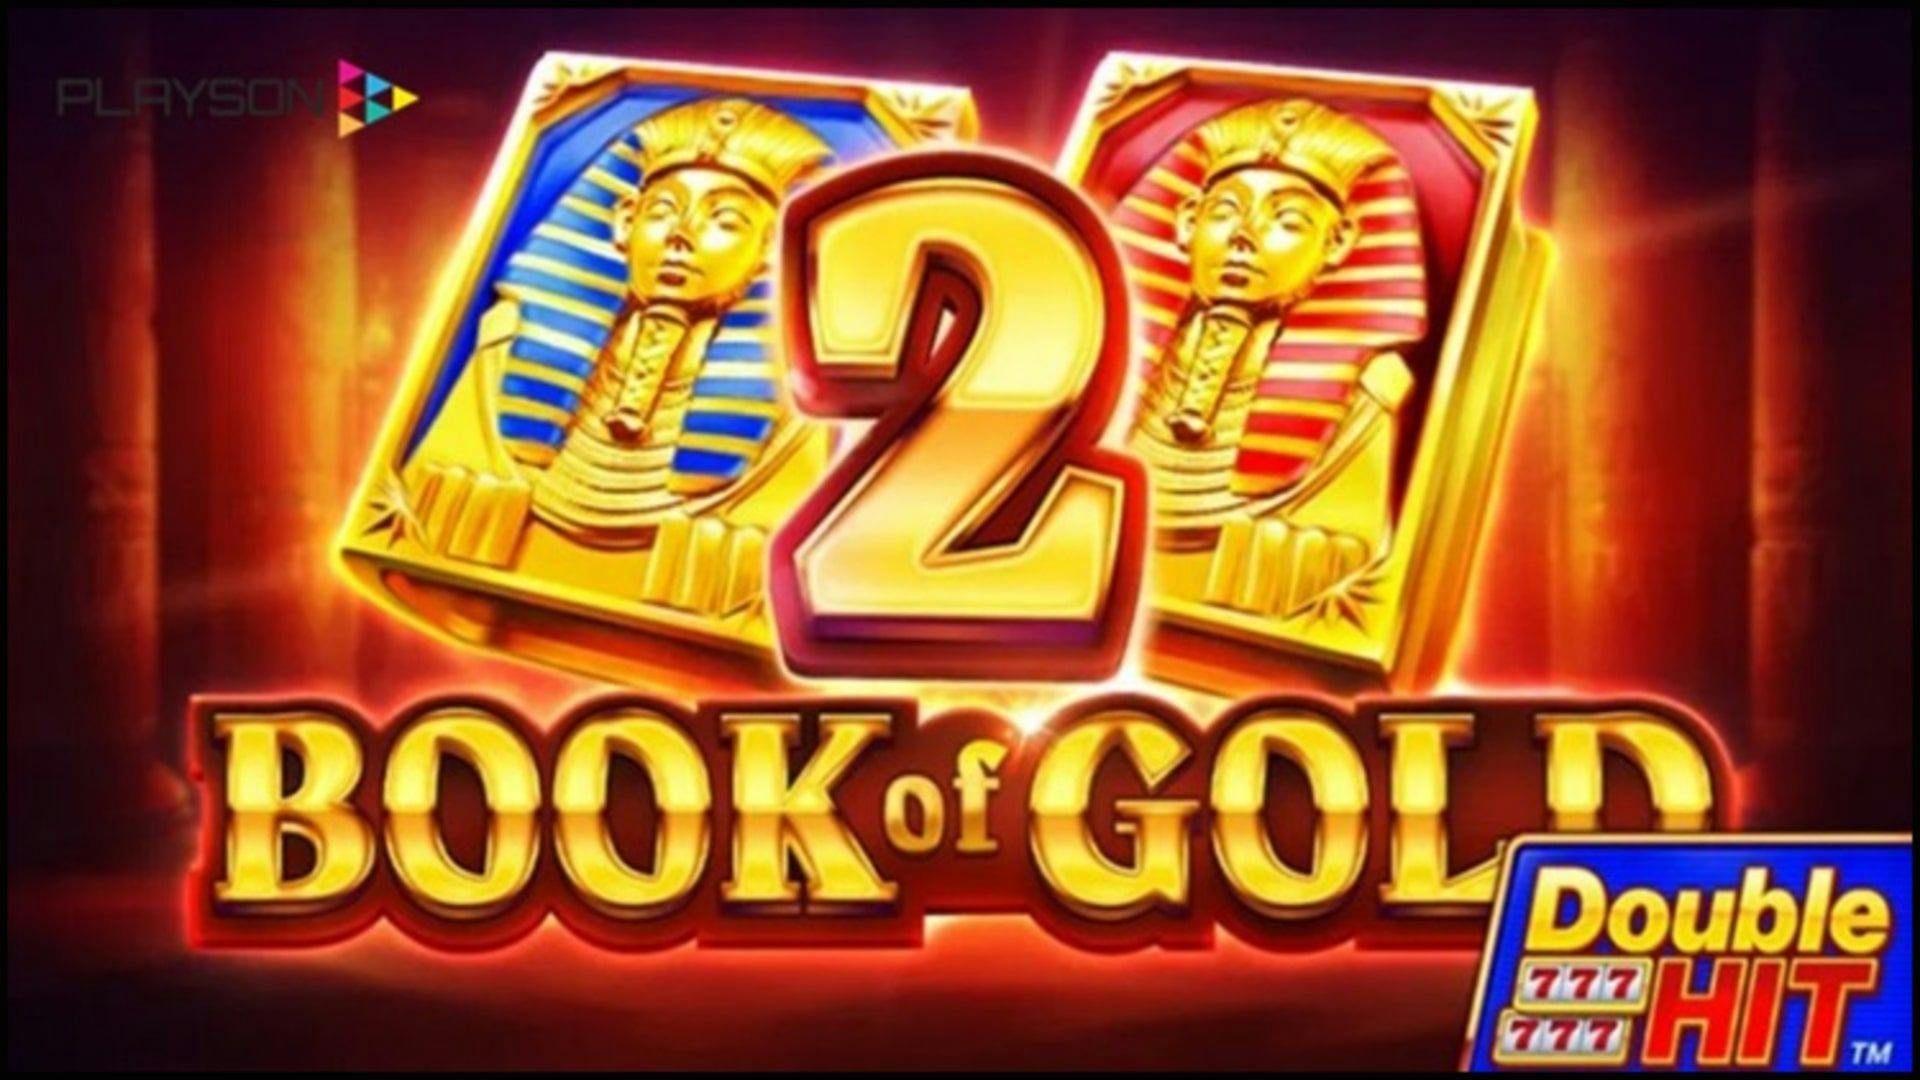 Slot Machine Book of Gold 2 Double Hit Free Game Play